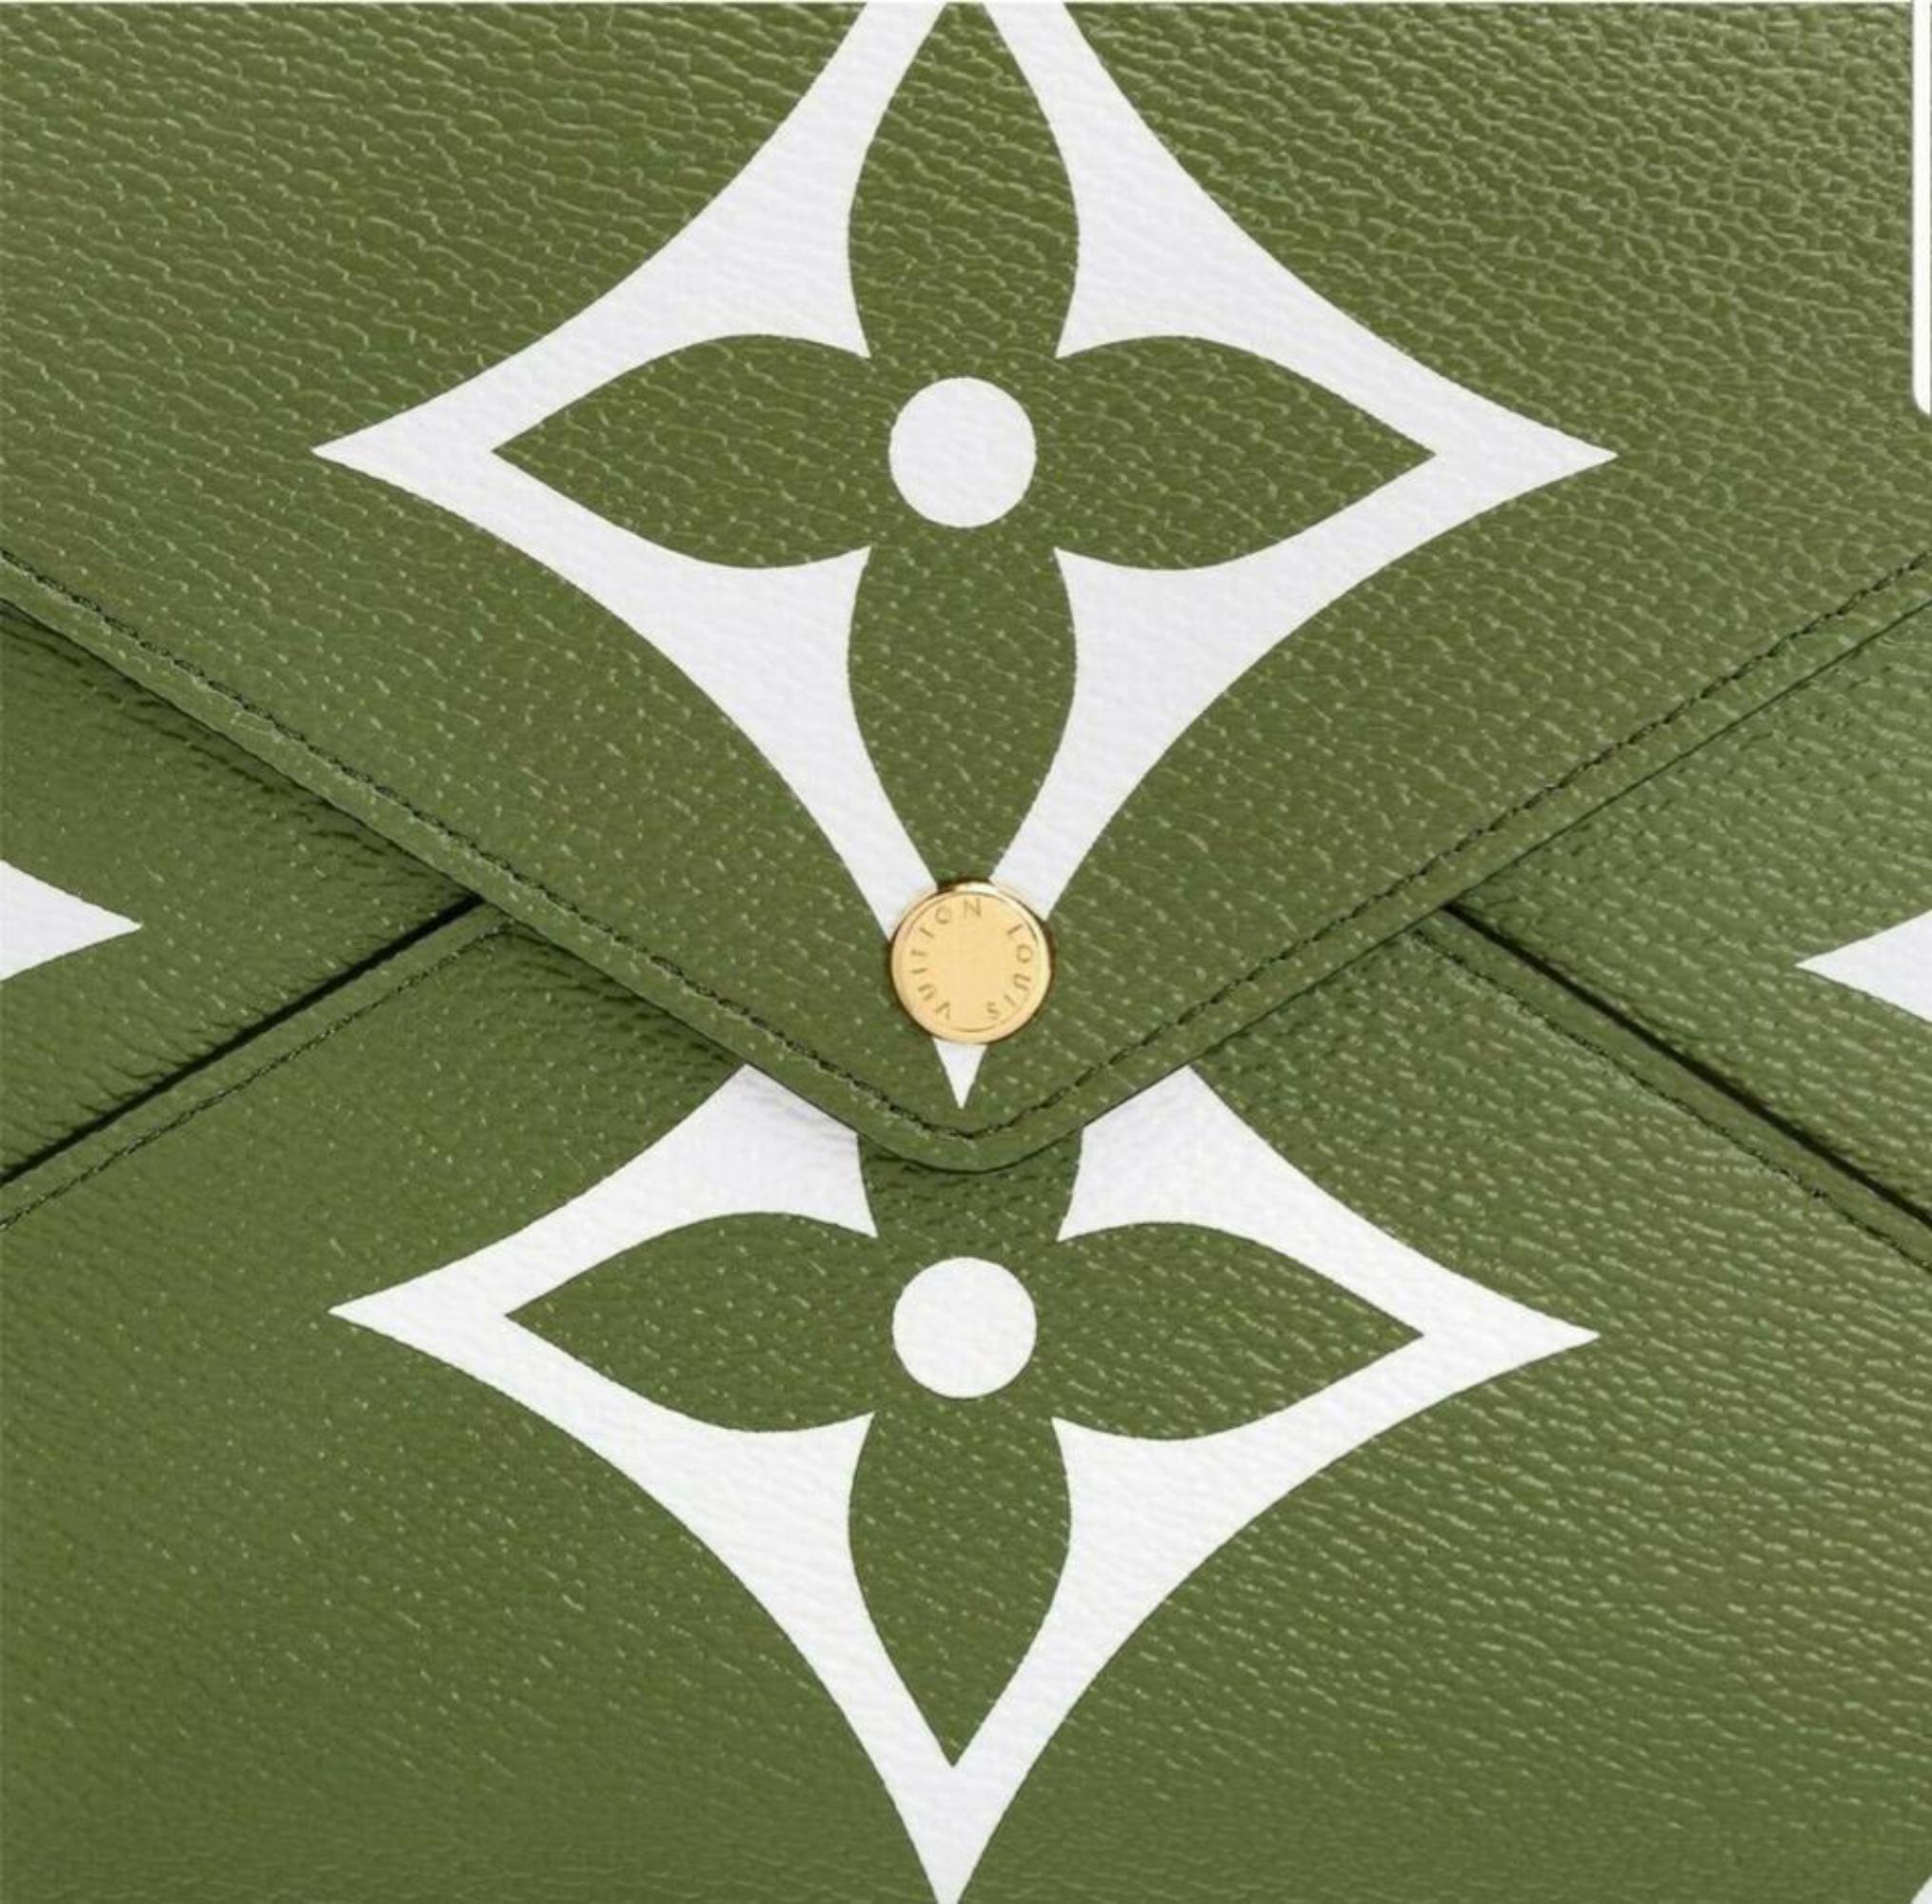 Louis Vuitton Khaki Large Ss19 Limited Edition Giant Kirigami Pouch 870618  For Sale 5